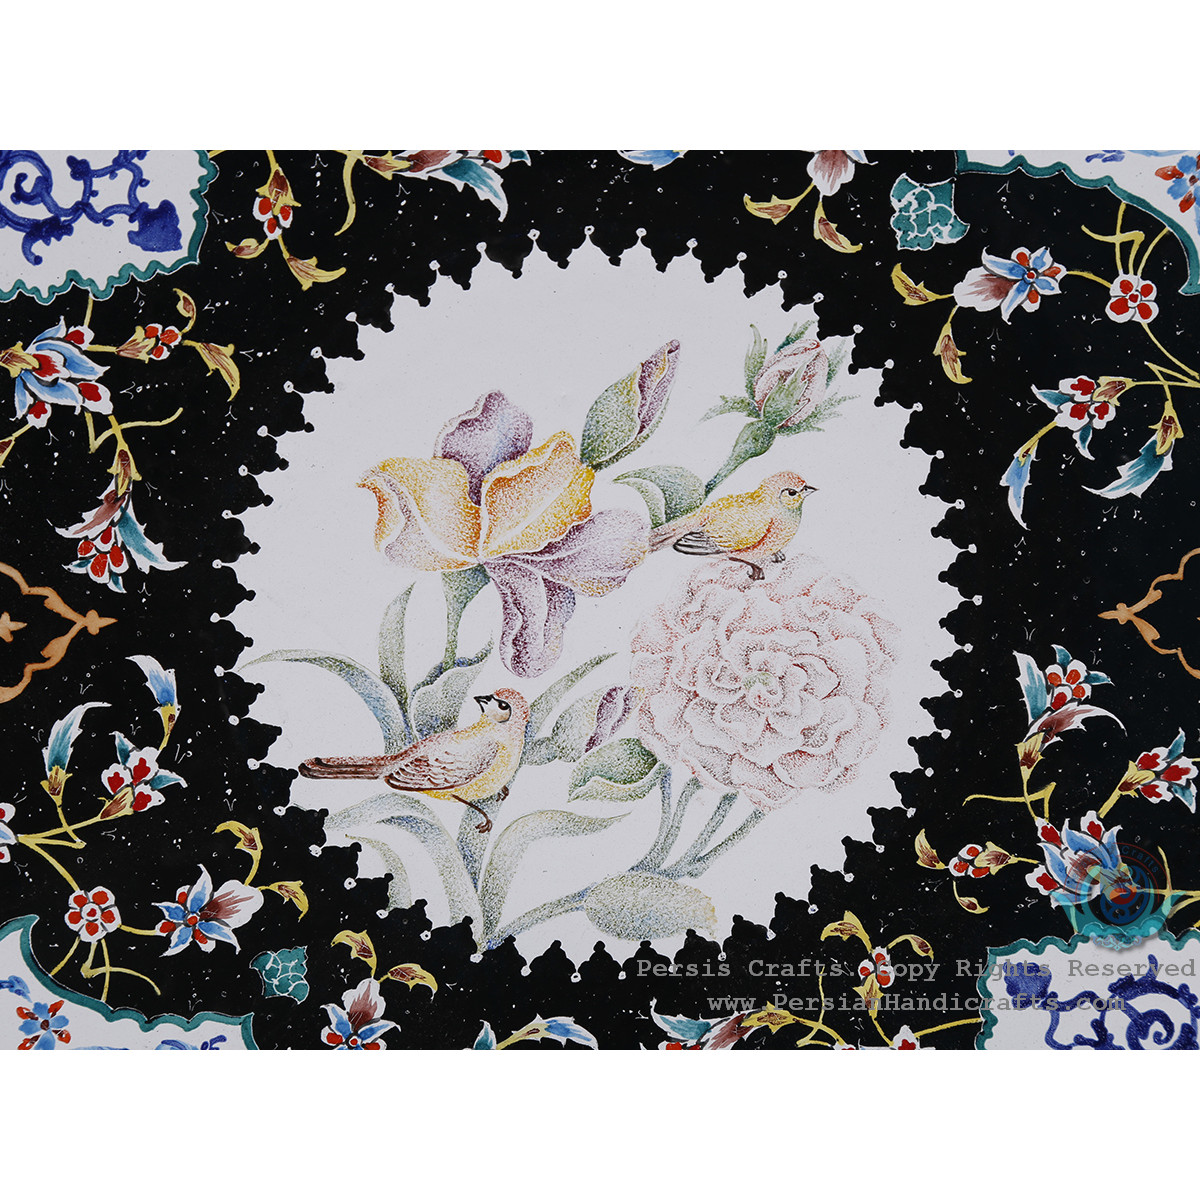 Exceptional Black Wall Plate w Colorful Eslimi Toranj - HE4004-Persian Handicrafts